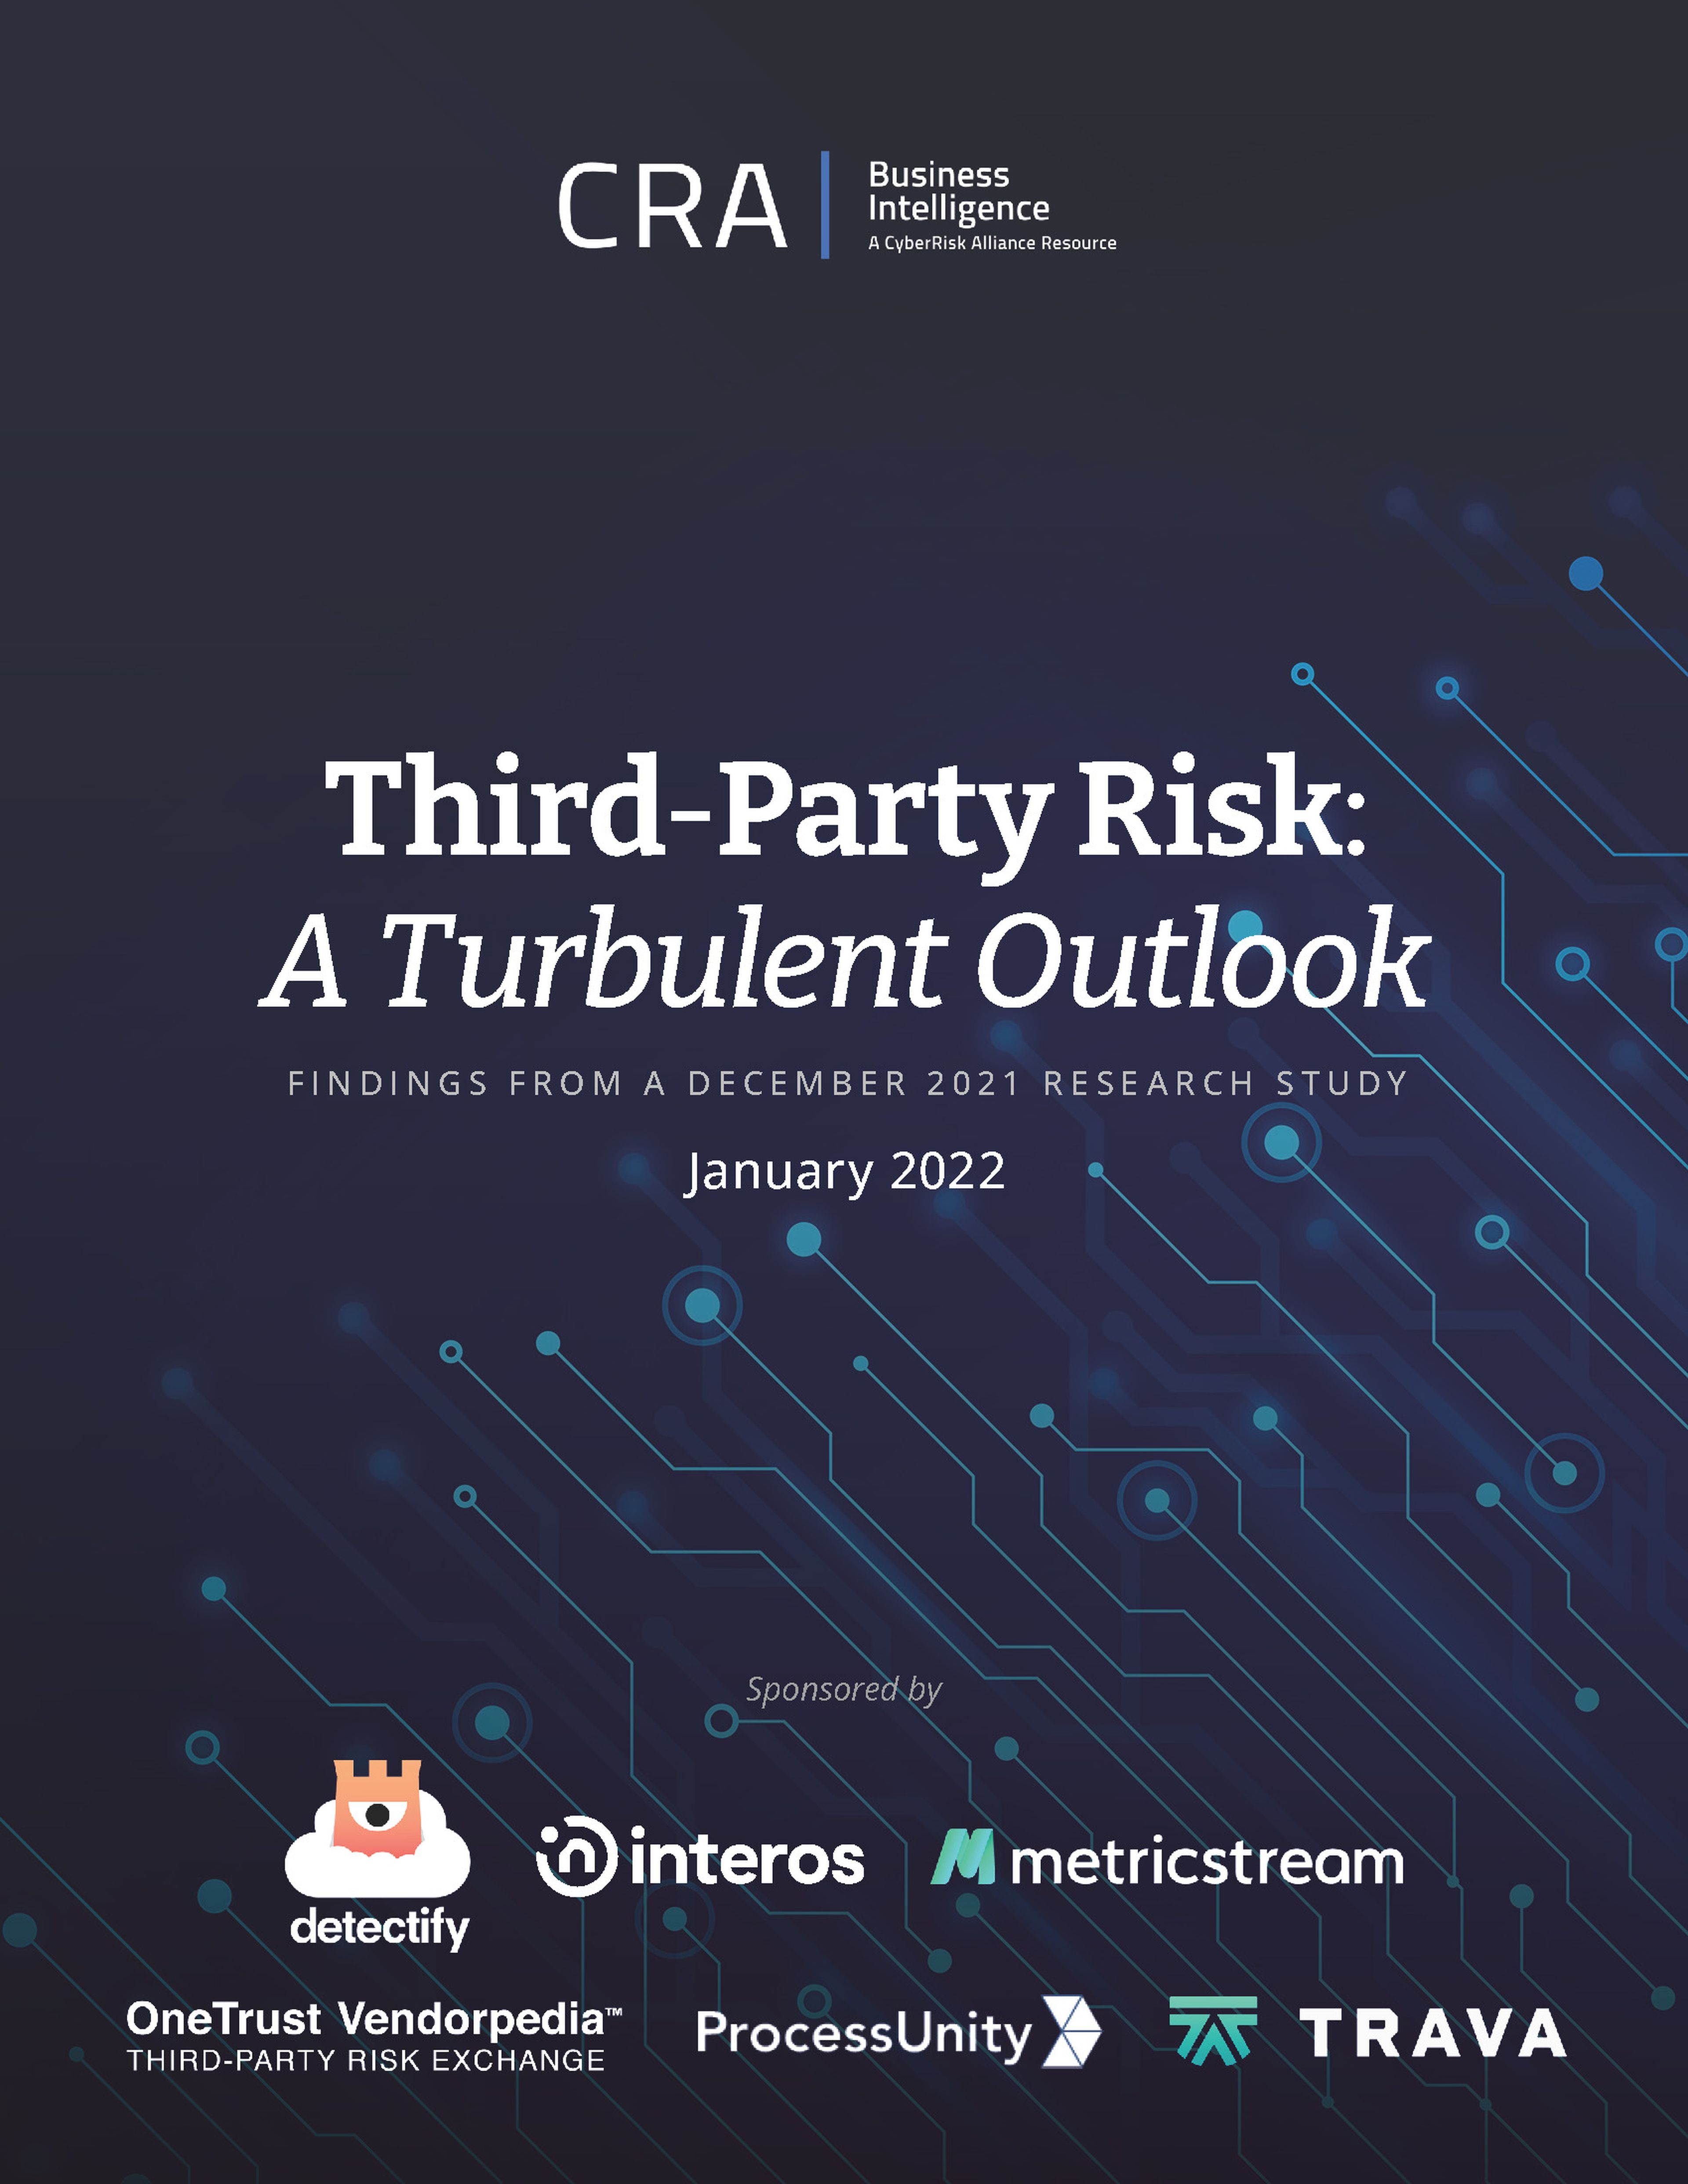 Third-Party Risk: A Turbulent Outlook